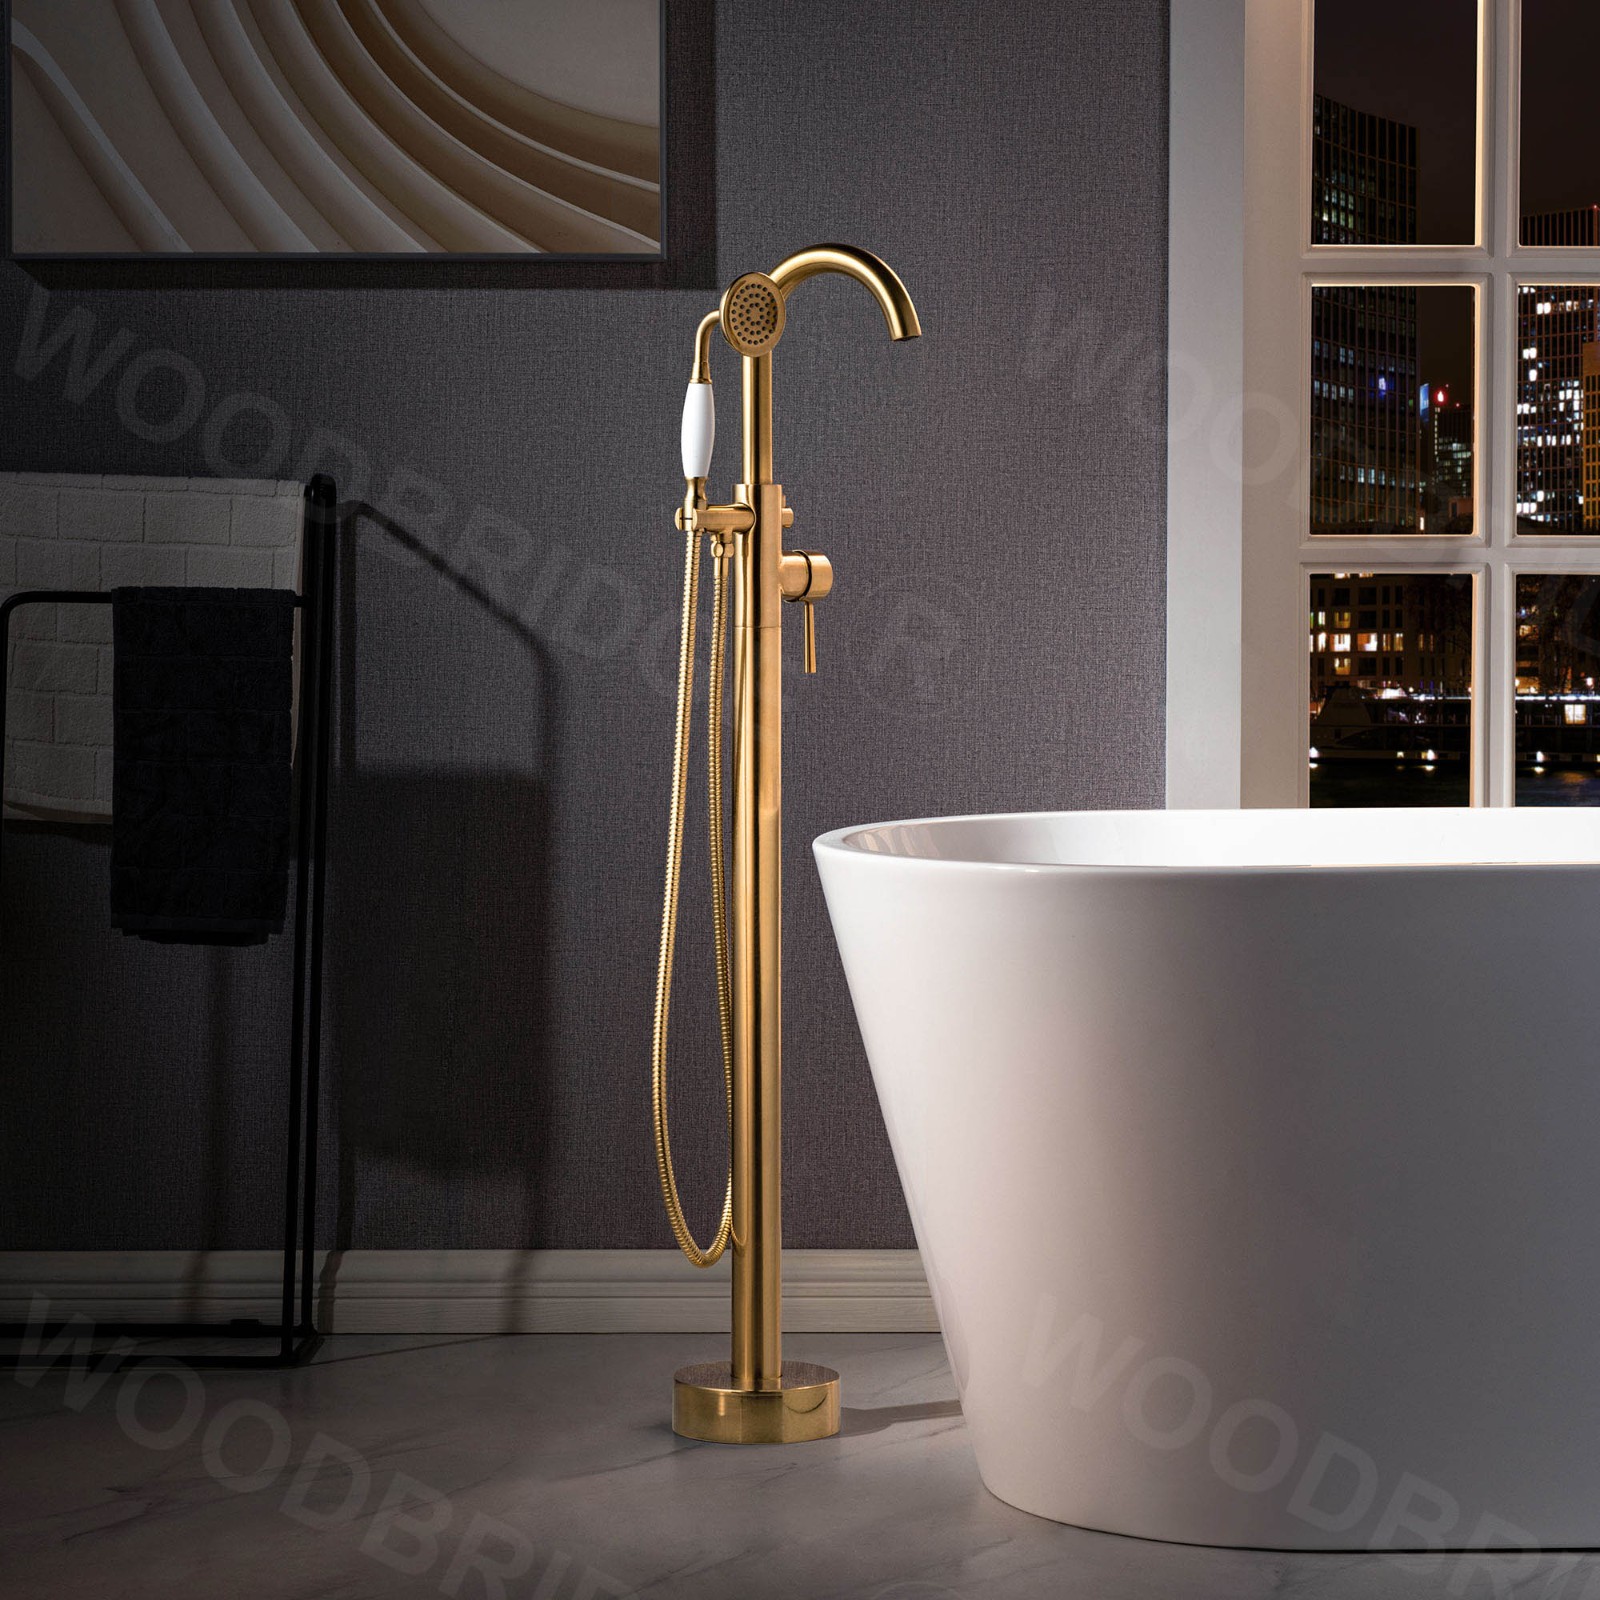  WOODBRIDGE F0026BGVT Fusion Single Handle Floor Mount Freestanding Tub Filler Faucet with Telephone Hand shower in Brushed Gold Finish._4182